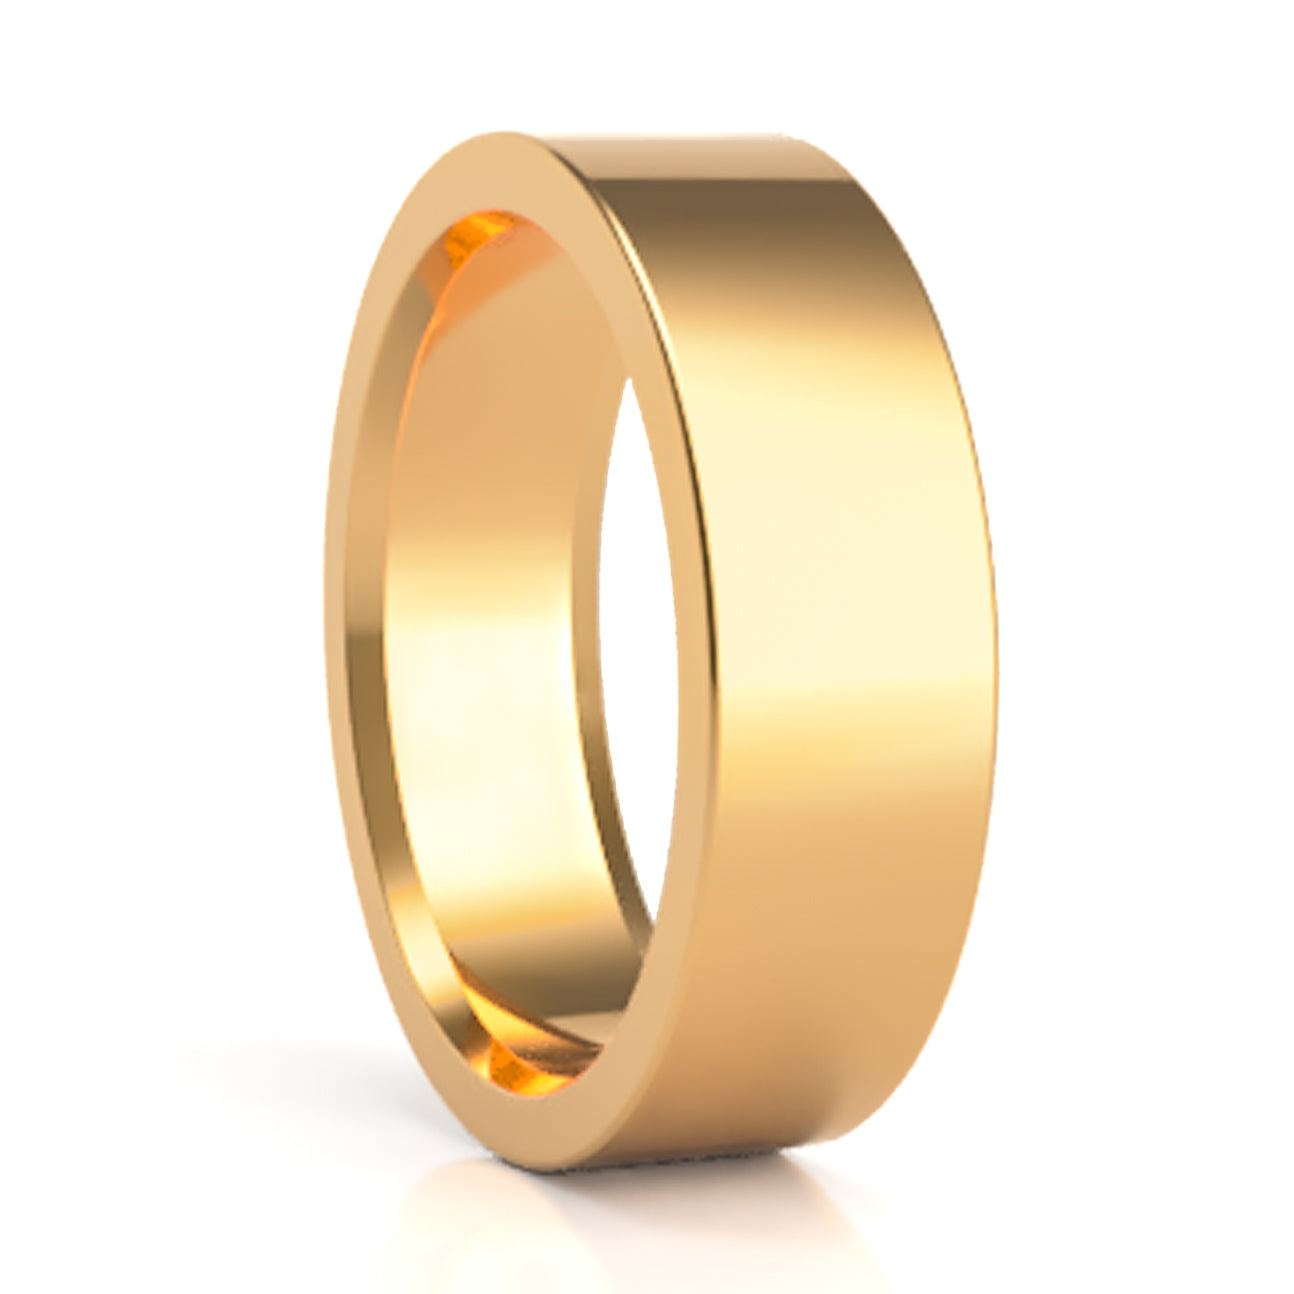 A 18k gold classic wedding band displayed on a neutral white background.